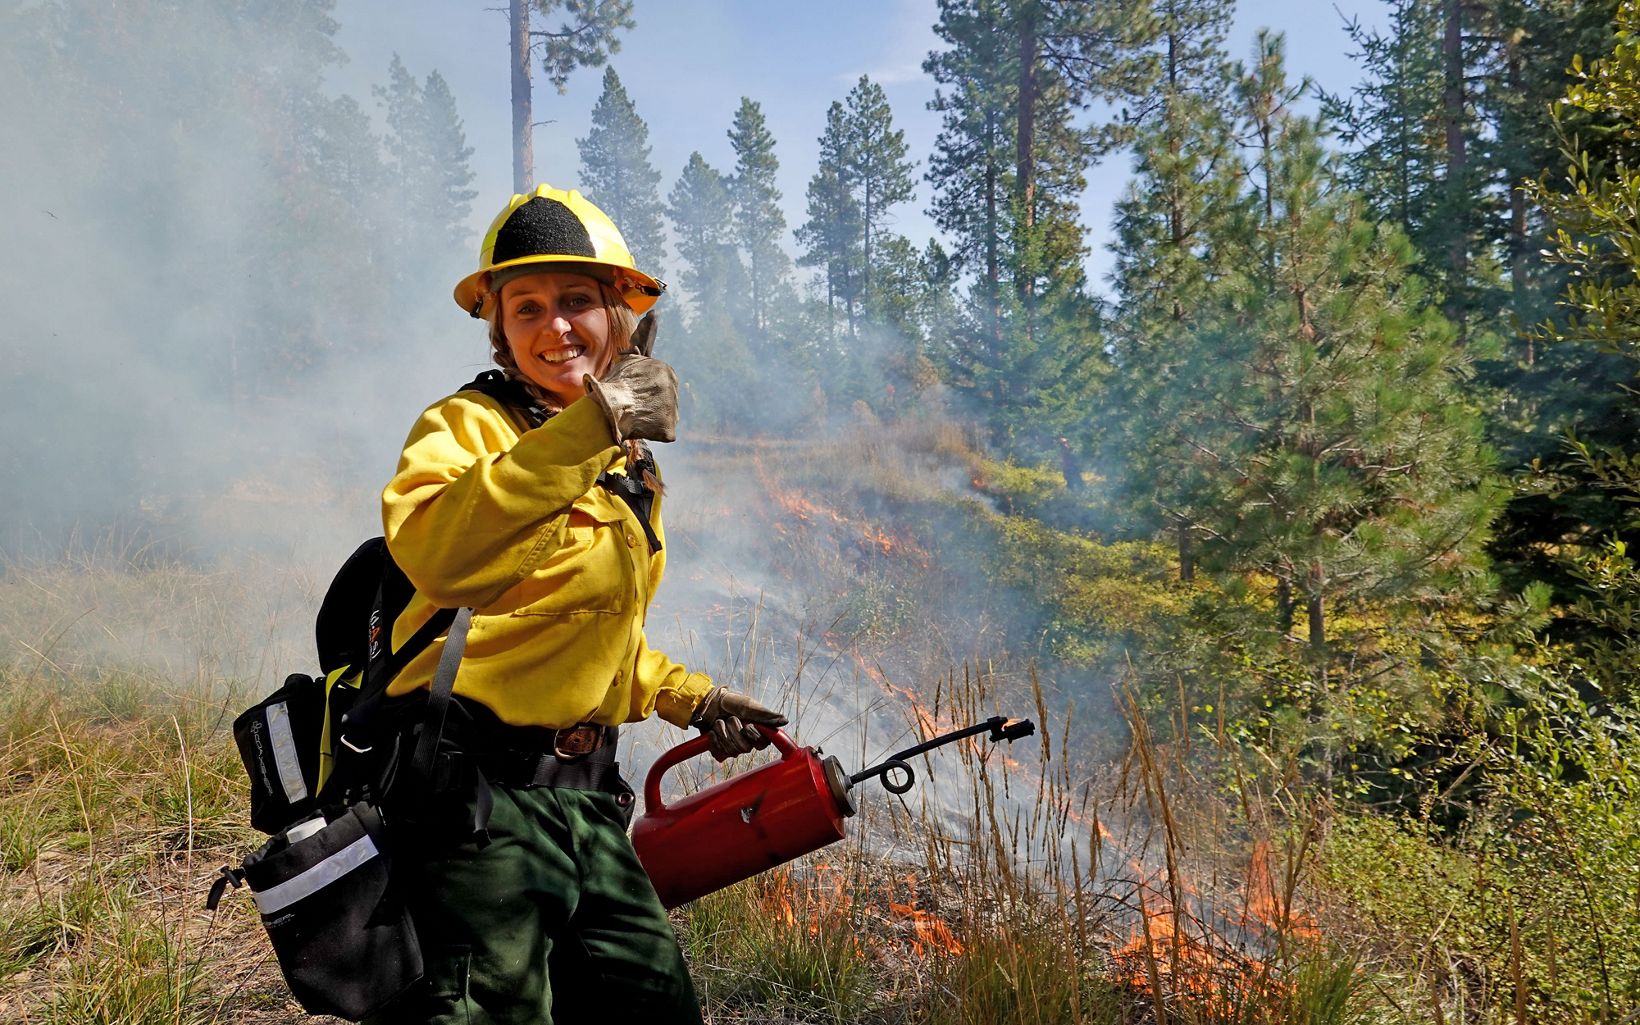 A fire fighter grins and gives a thumbs up while holding a drip torch. Fire burns the grasses.